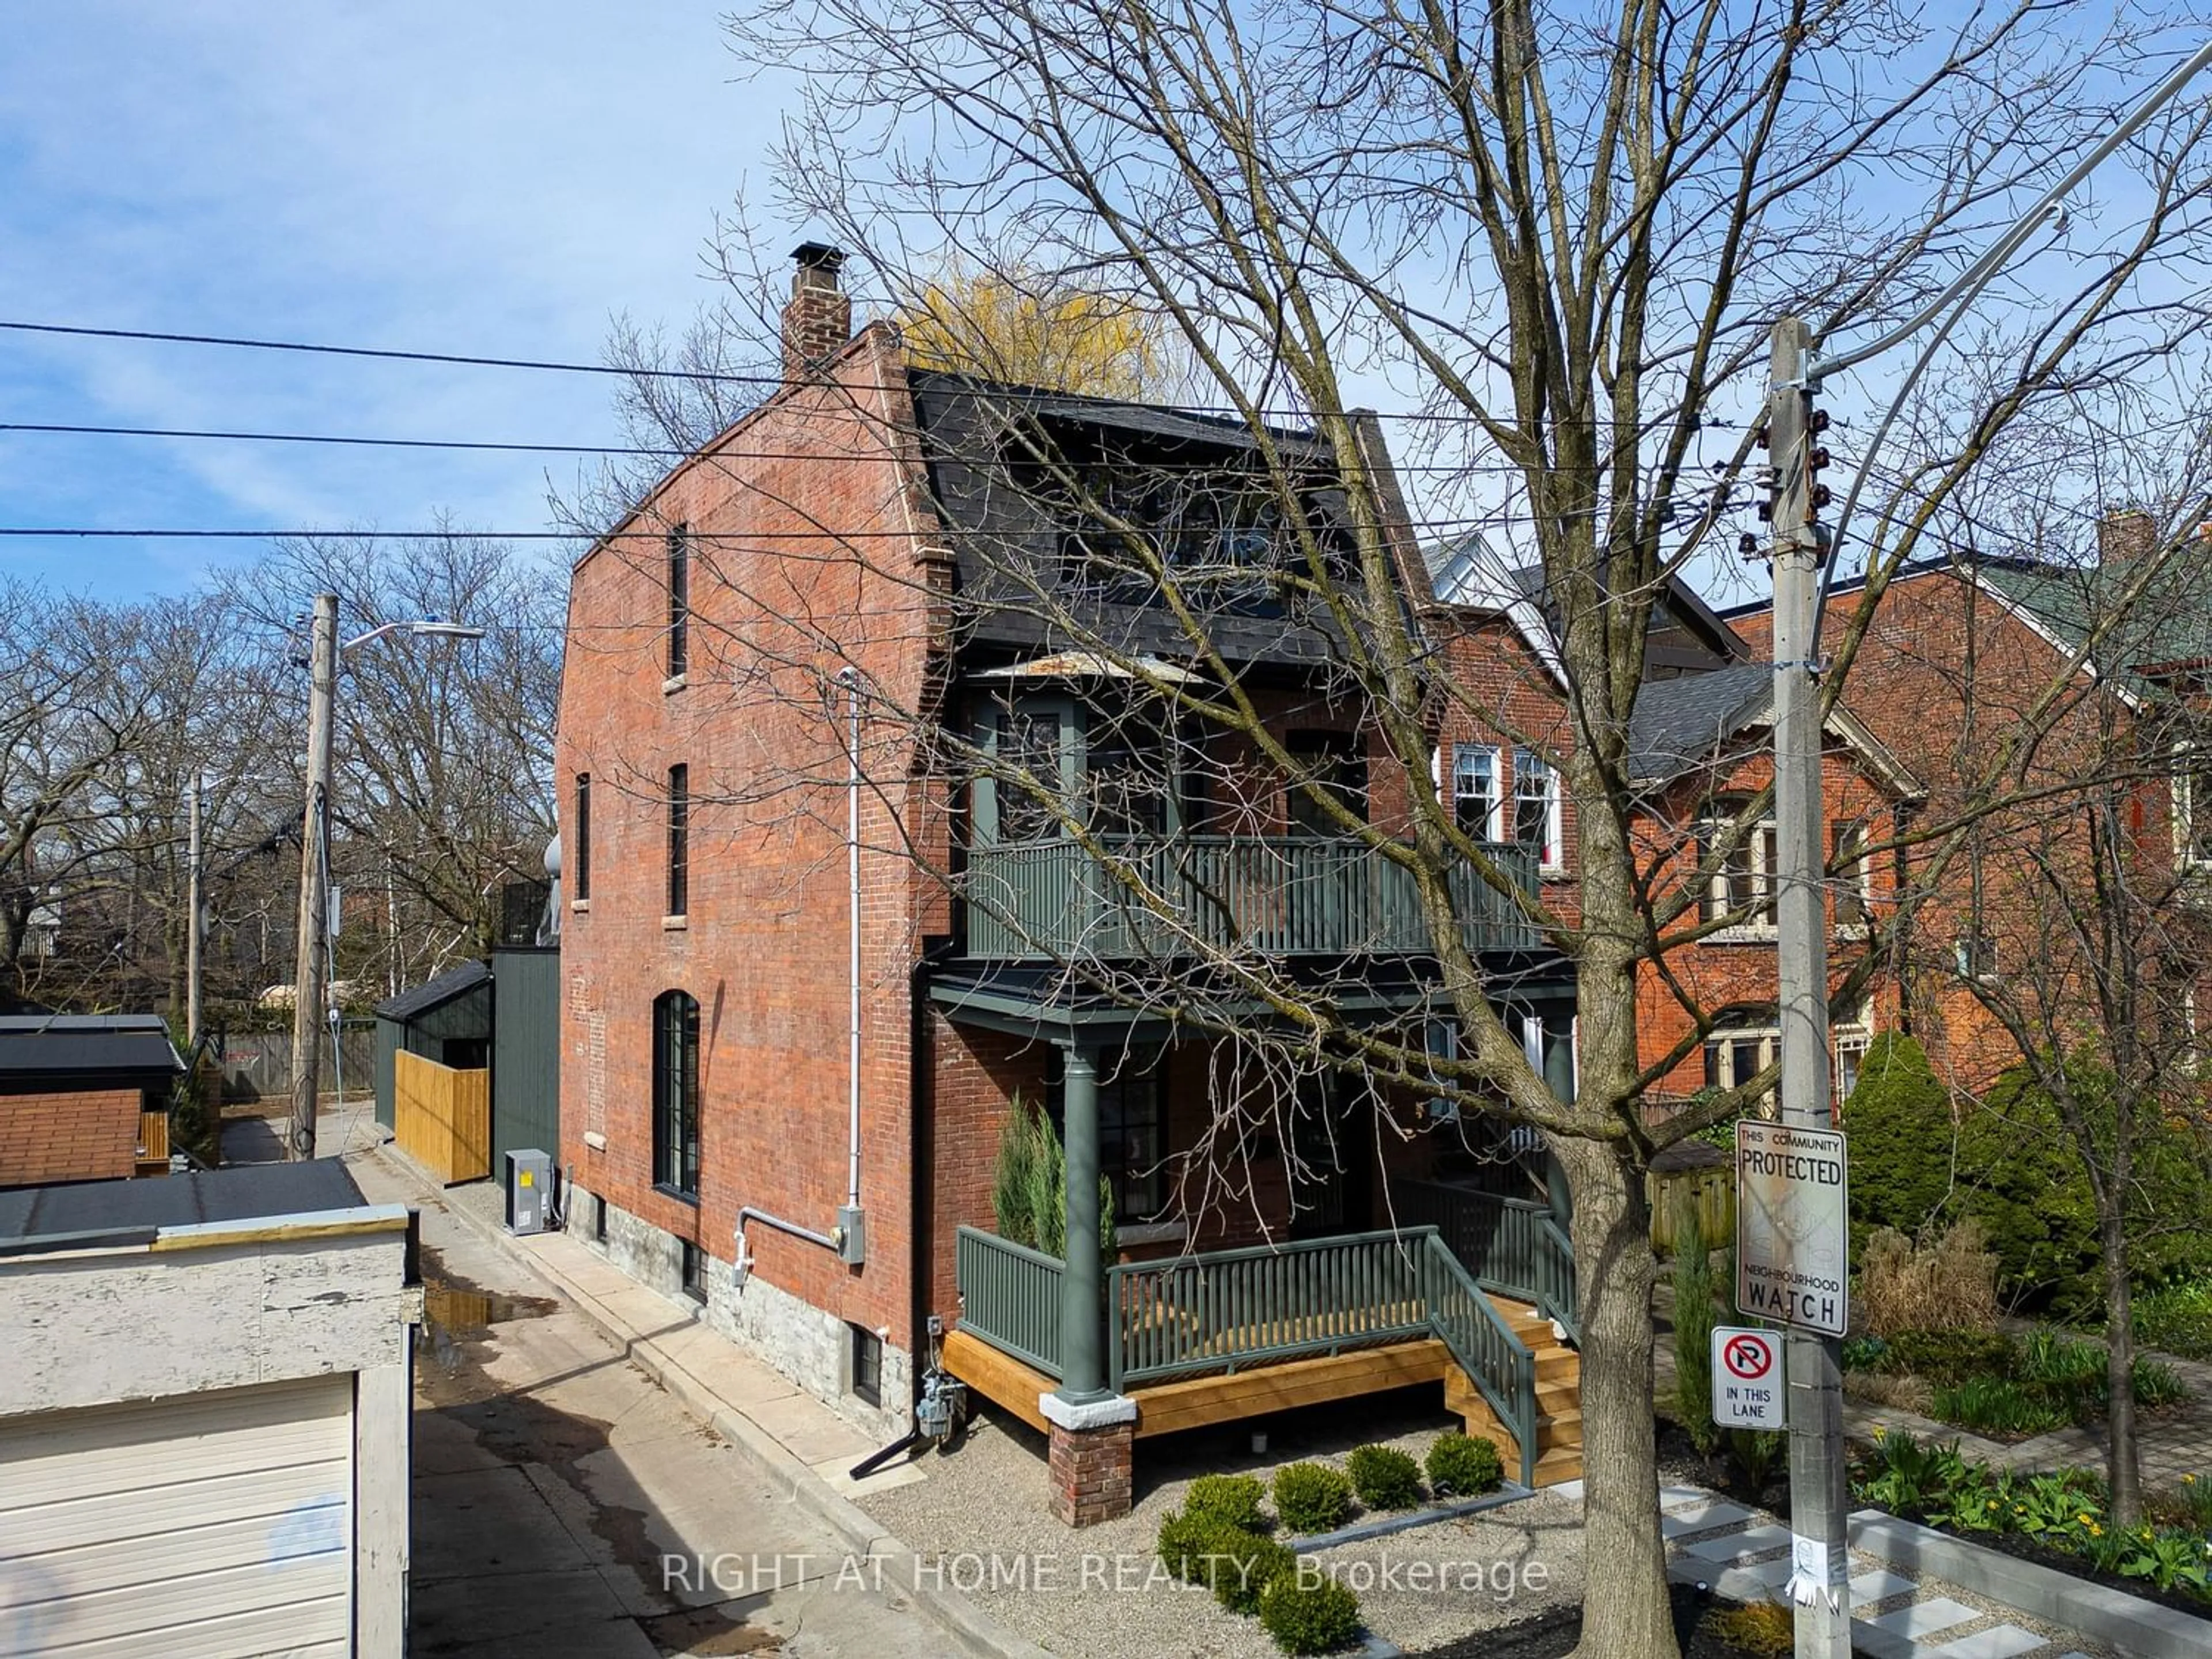 Home with brick exterior material for 160 Howland Ave, Toronto Ontario M5R 3B6